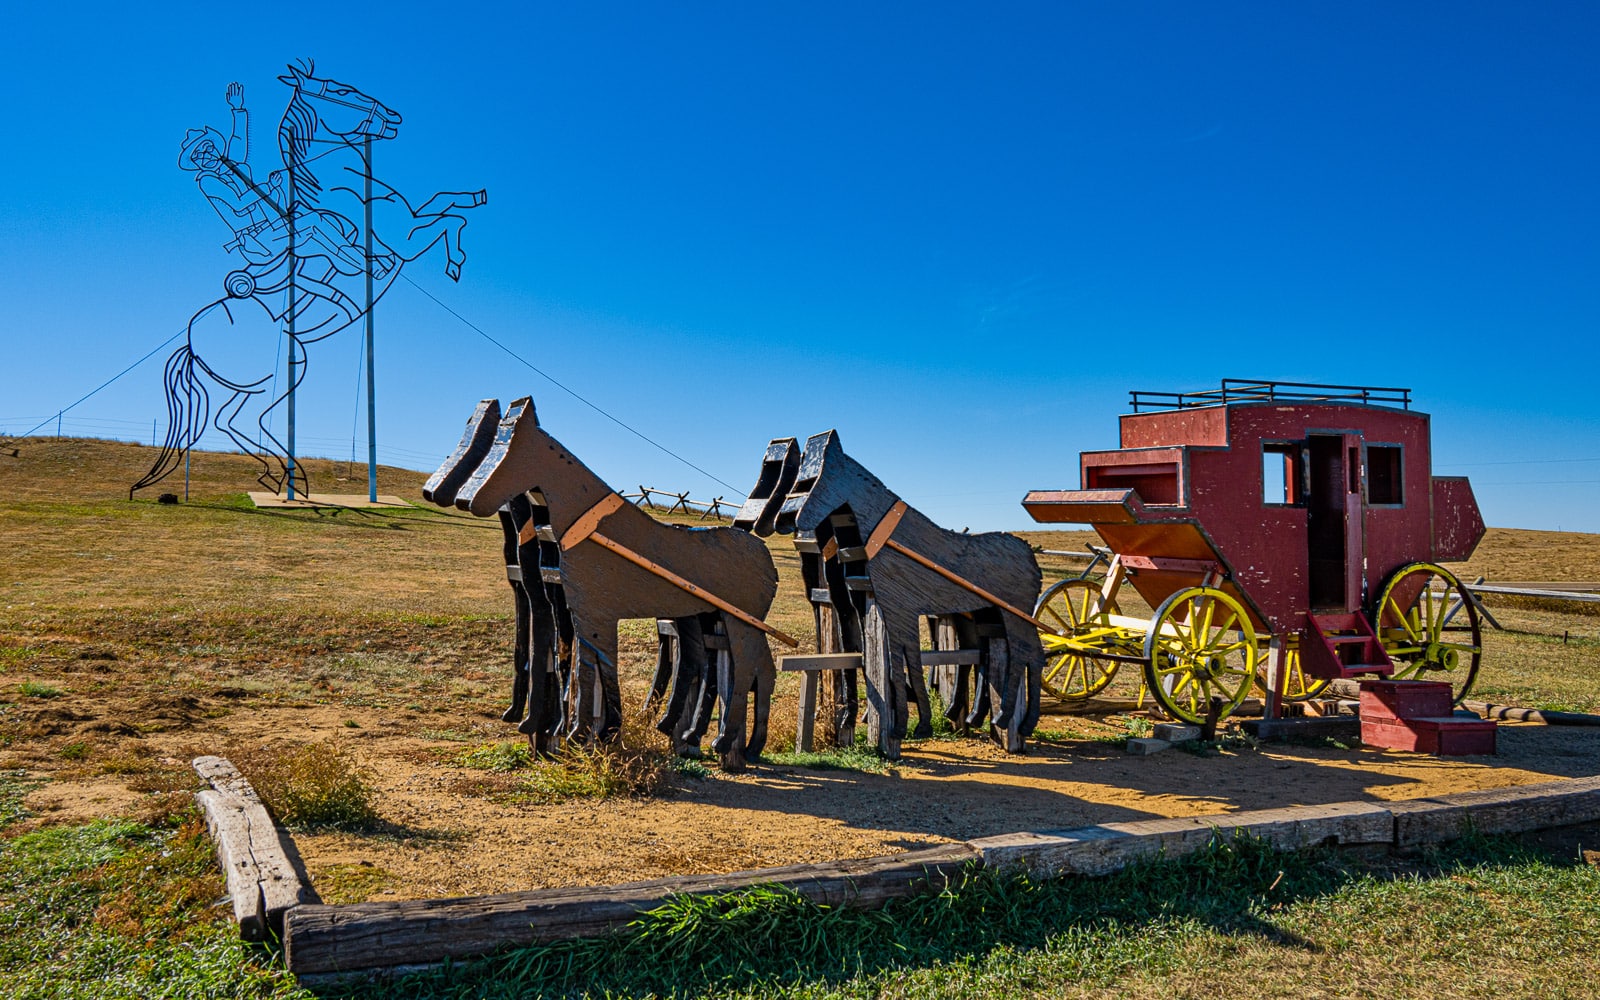 This is an overview of the sculpture by Gary Greff called Teddy Rides Again. It is located along the Enchanted Highway running between I-94 and Regent, North Dakota.